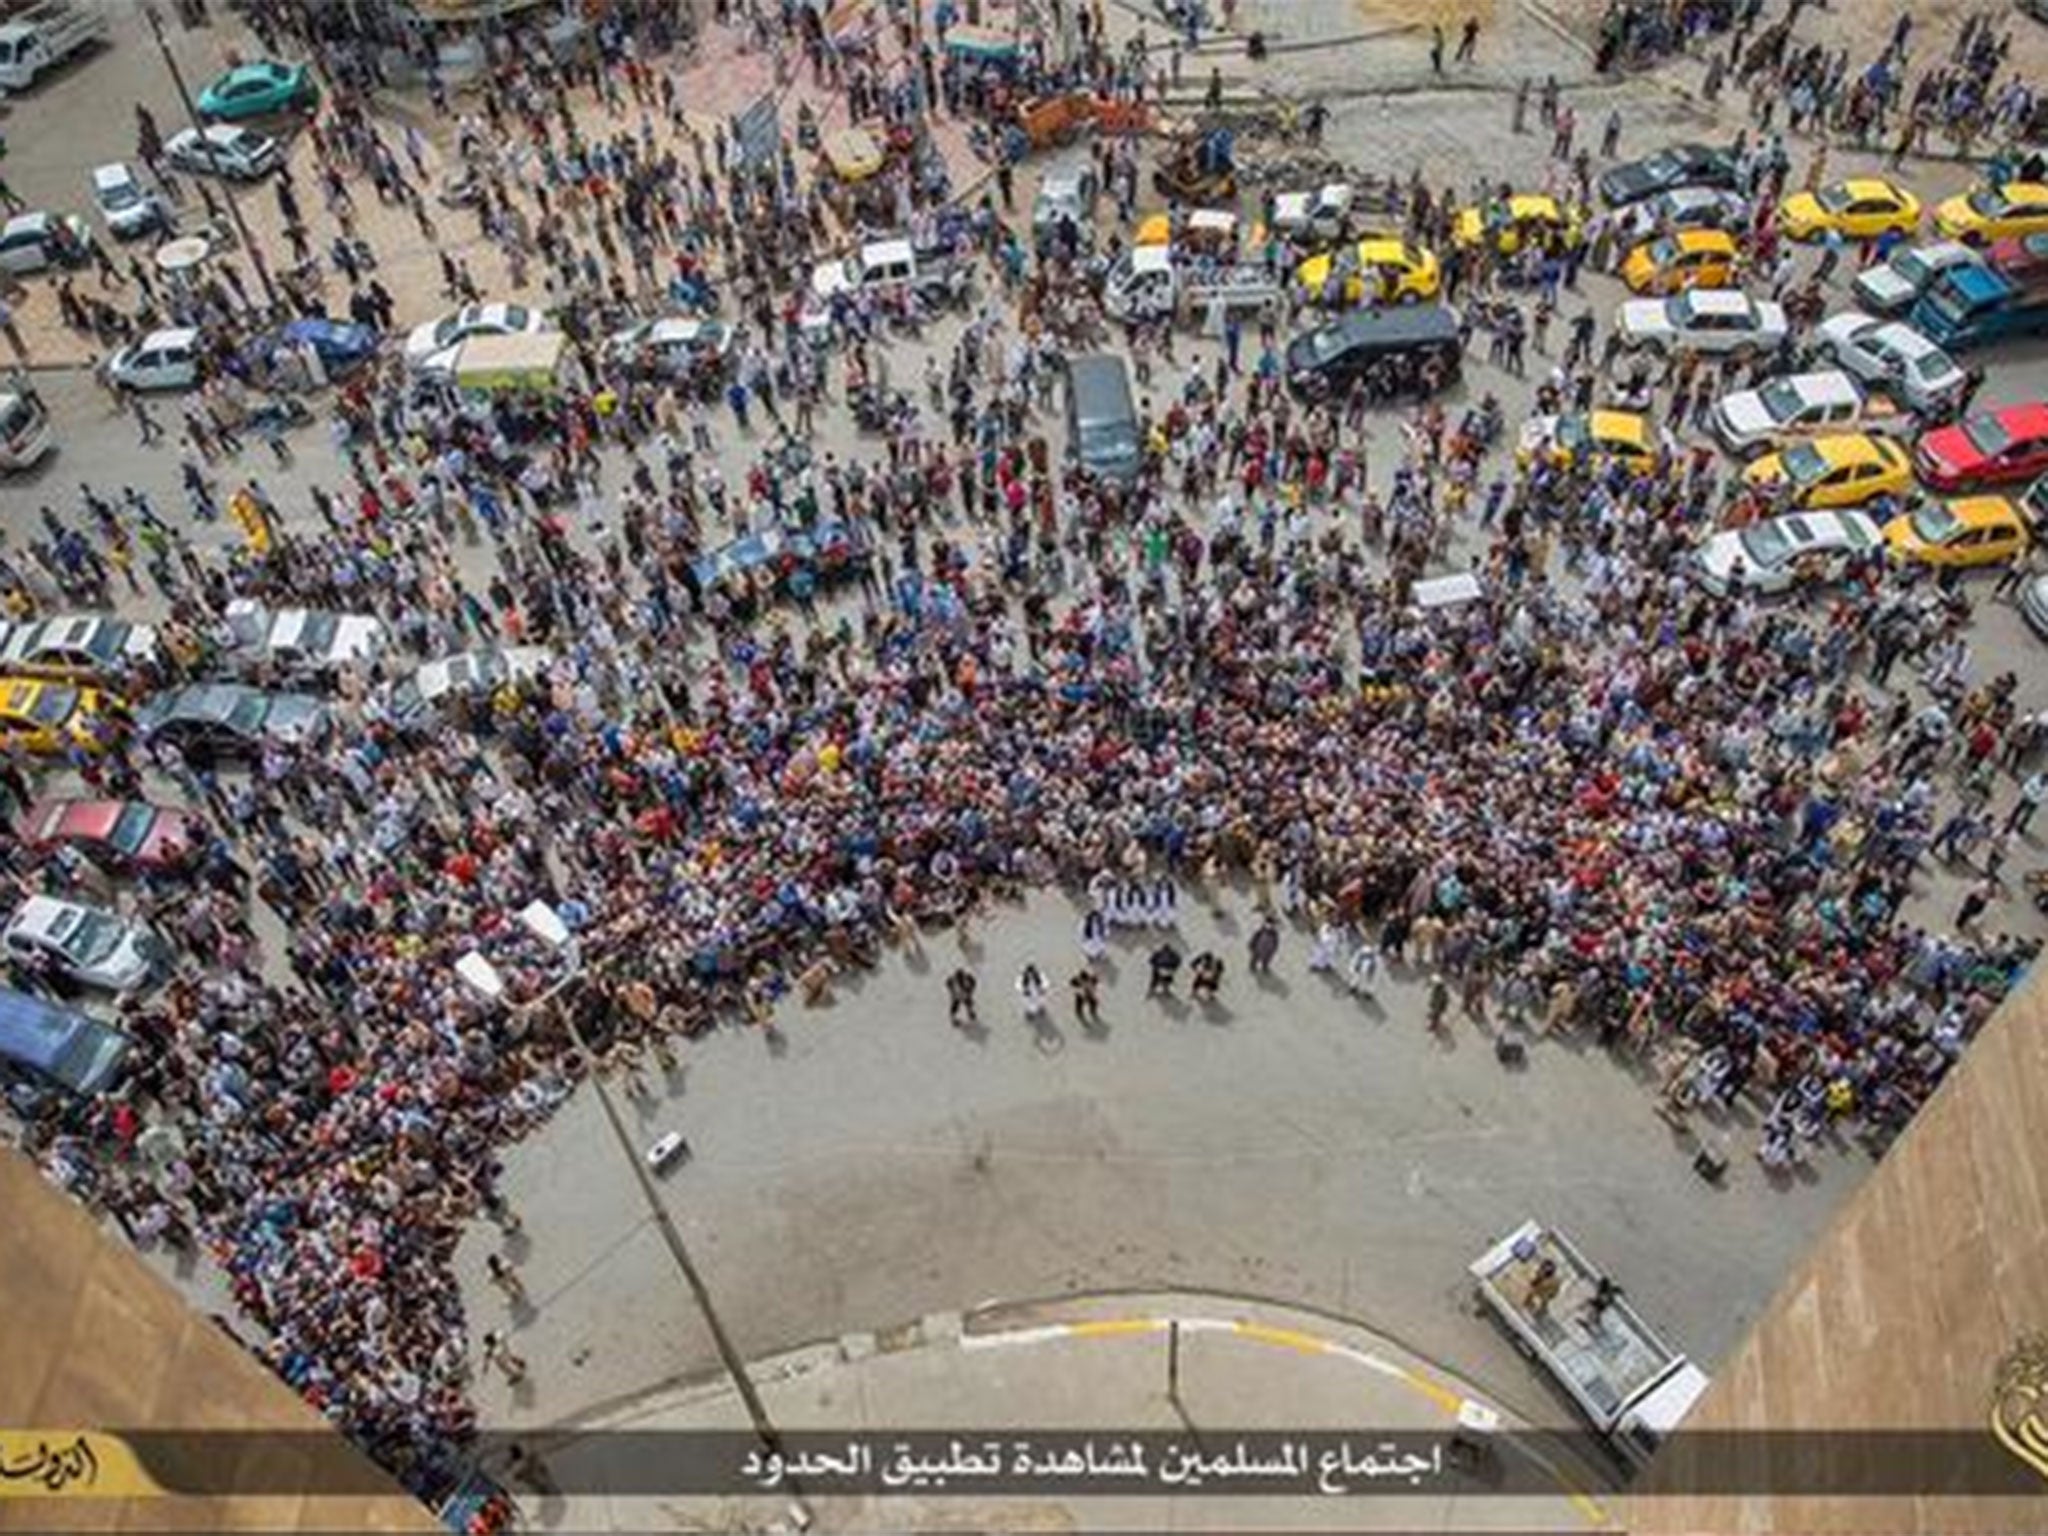 Bystanders gather as Isis militants throw a man suspected of being gay to his death